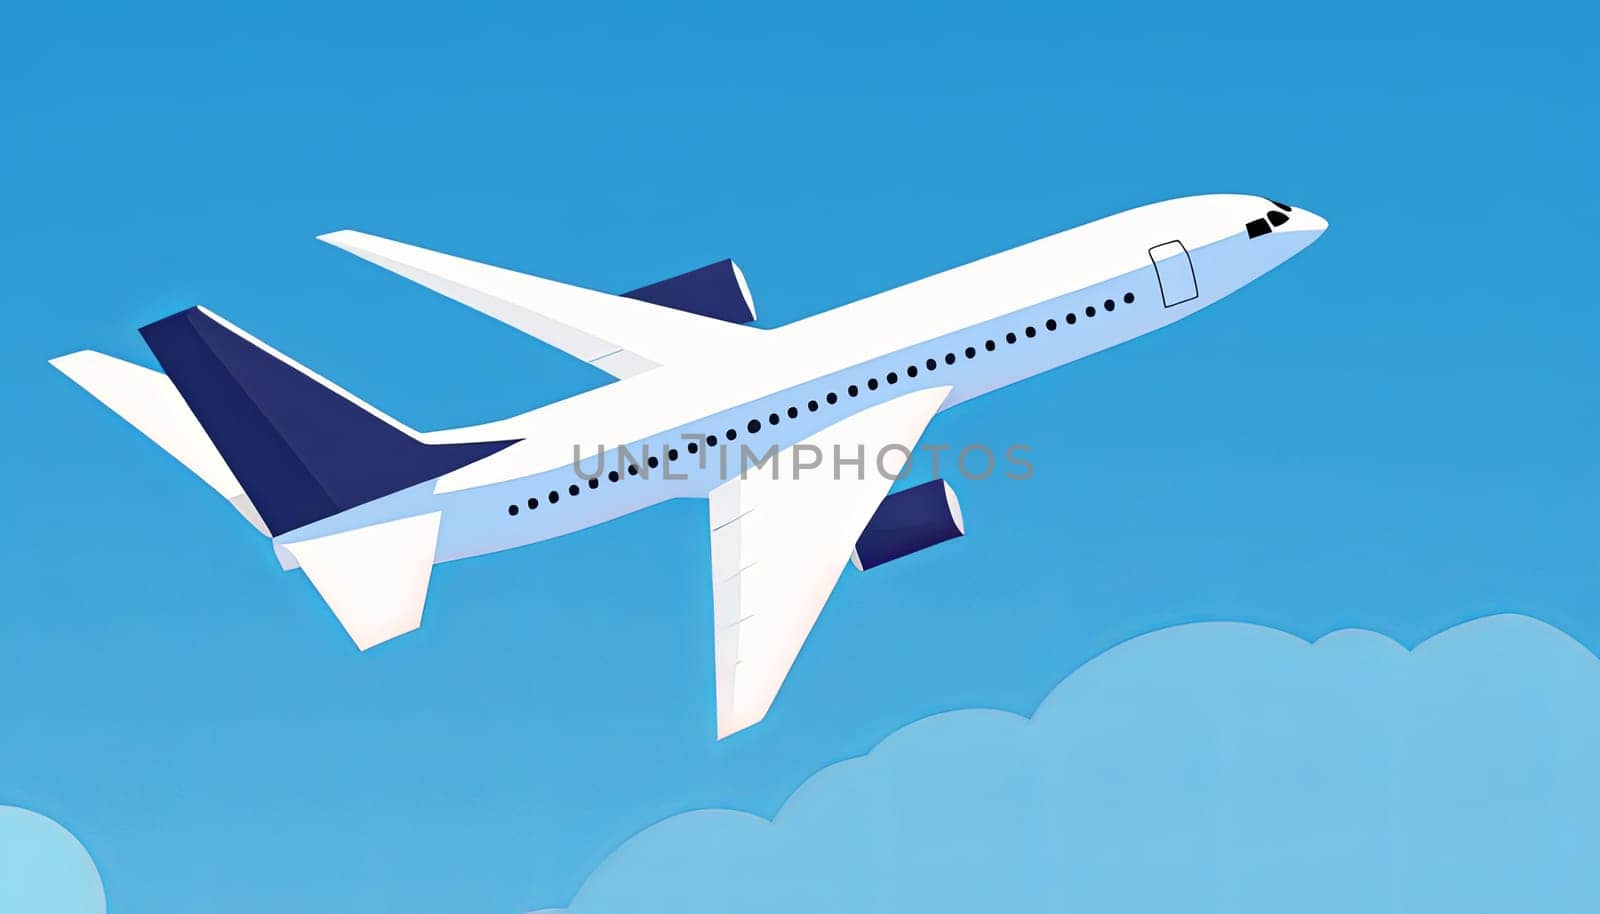 Illustration of a white commercial airplane on a blue background.